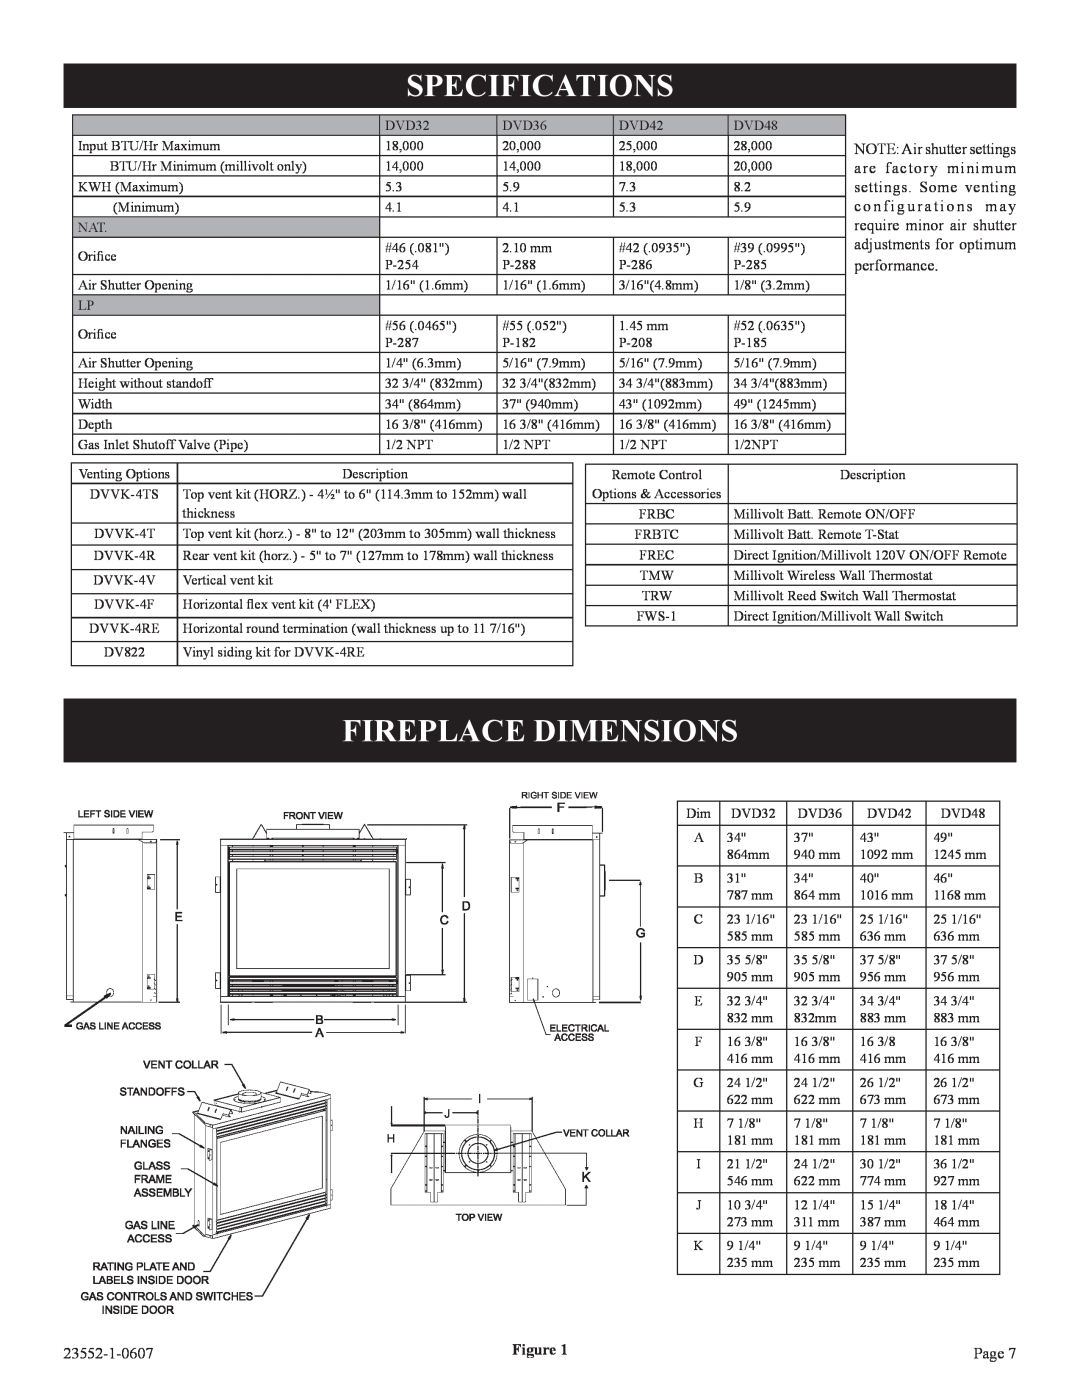 Empire Comfort Systems DVD48FP5, DVD42FP5, DVD48FP3 Specifications, Fireplace Dimensions, performance, 23552-1-0607, Page 